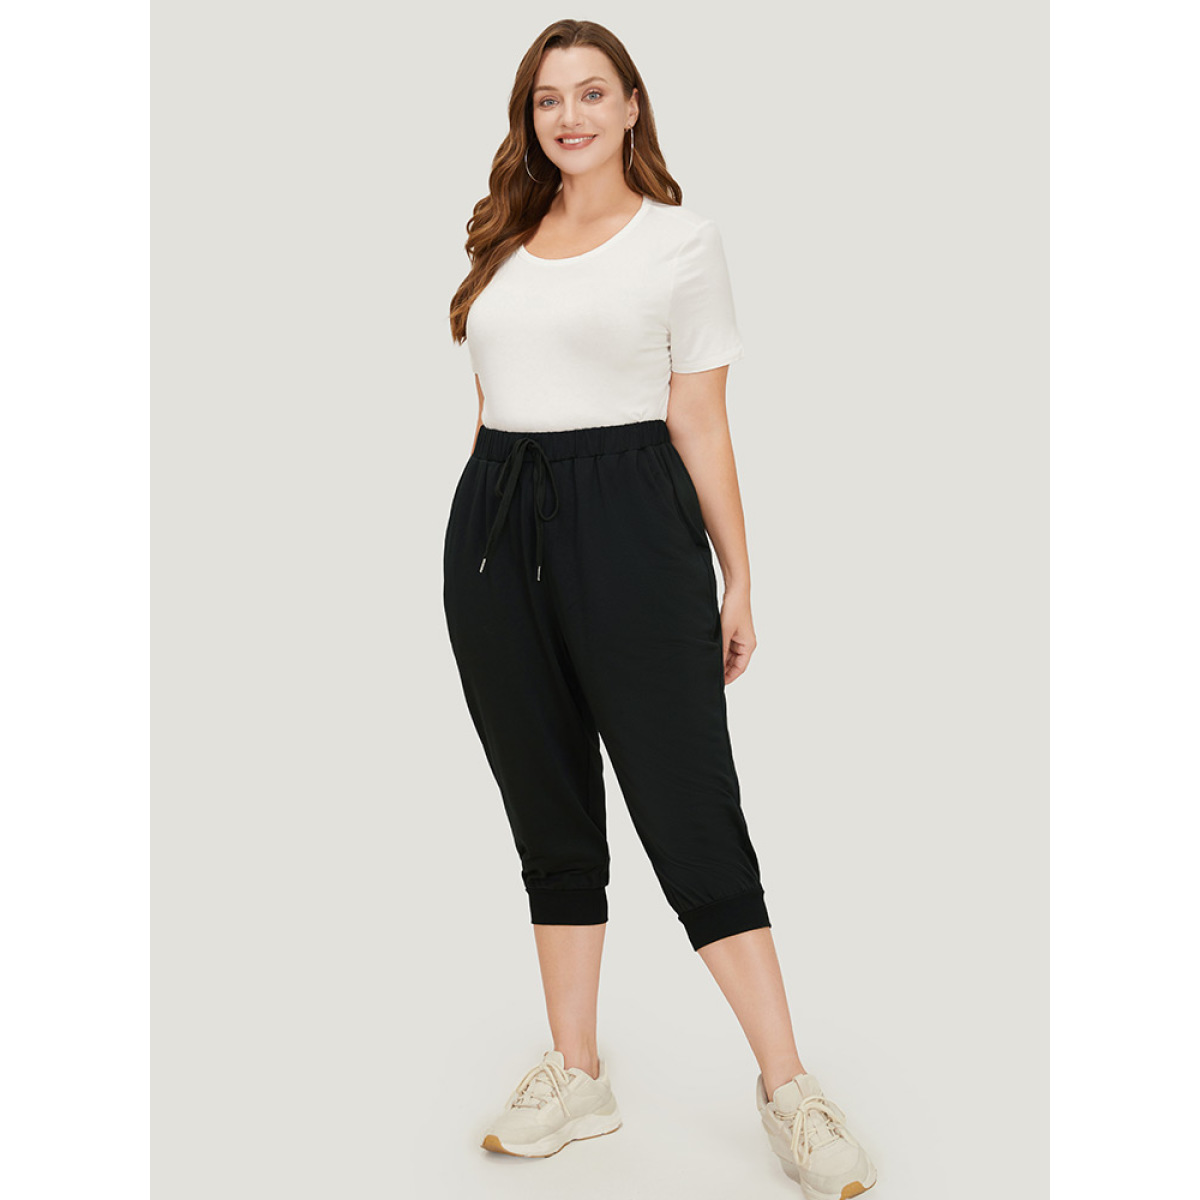 

Plus Size Solid Knot Front Pocket Carrot Pants Women Black Casual High Rise Dailywear Pants BloomChic